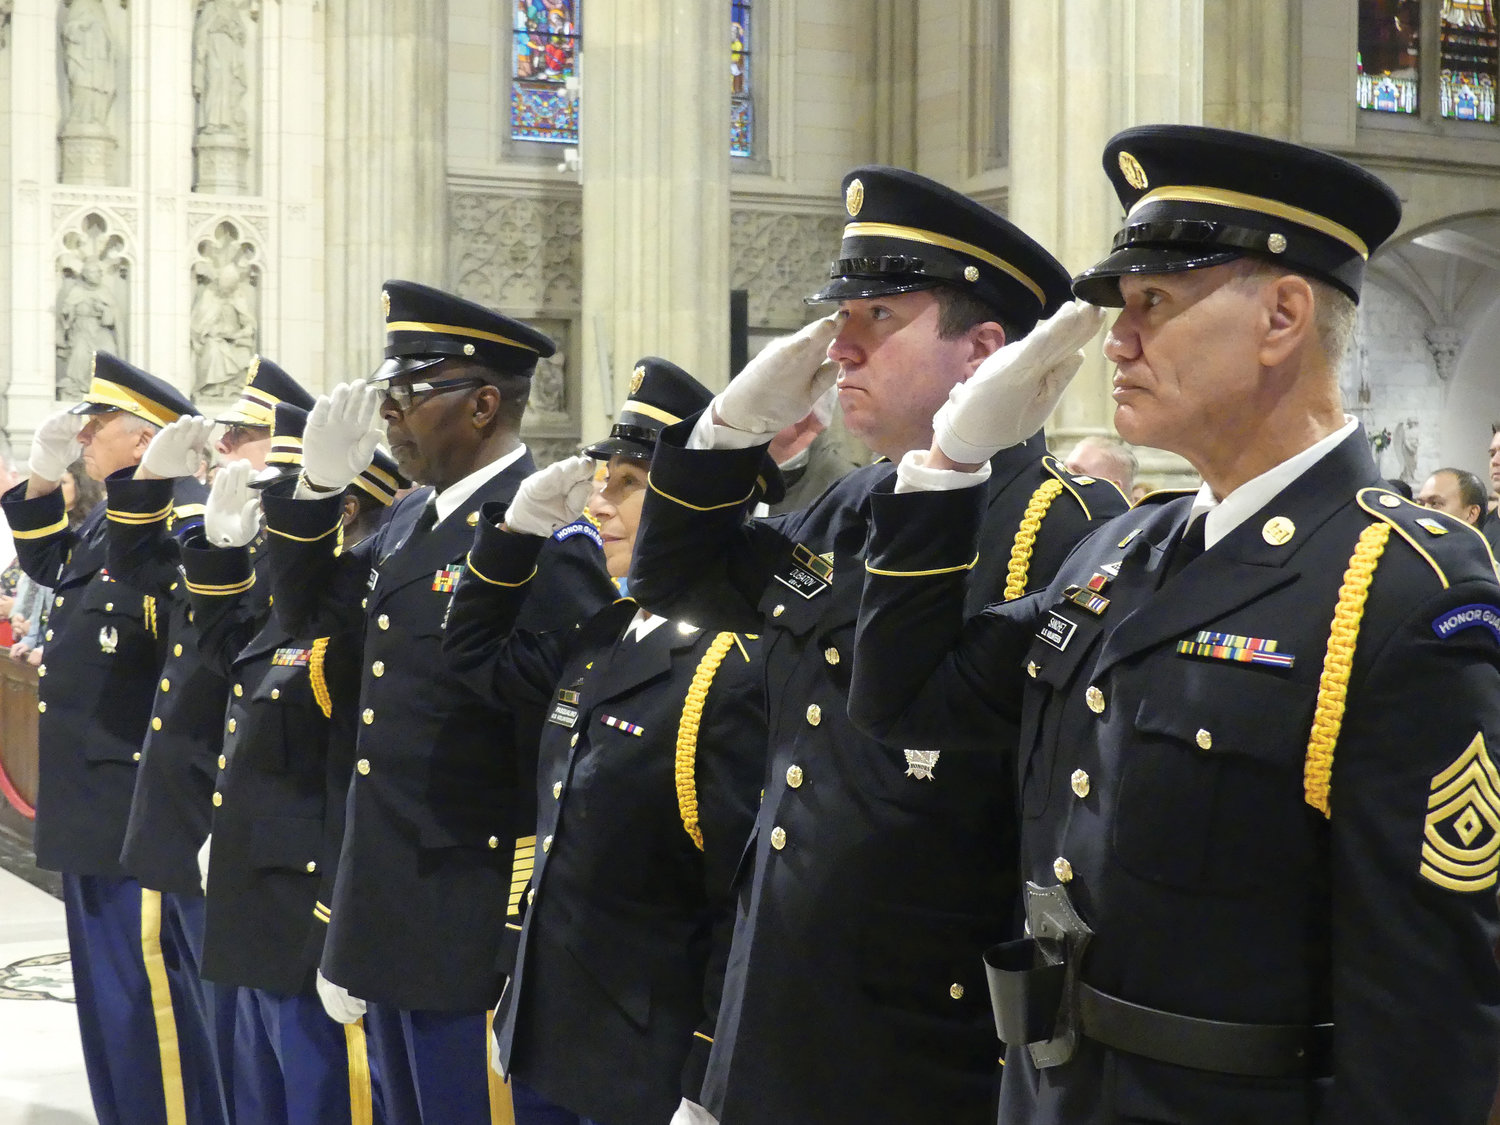 CHURCH AND COUNTRY—An honor guard salutes during the 10:15 a.m. Mass Cardinal Dolan celebrated Nov. 6 at St. Patrick’s Cathedral five days before Veterans Day.